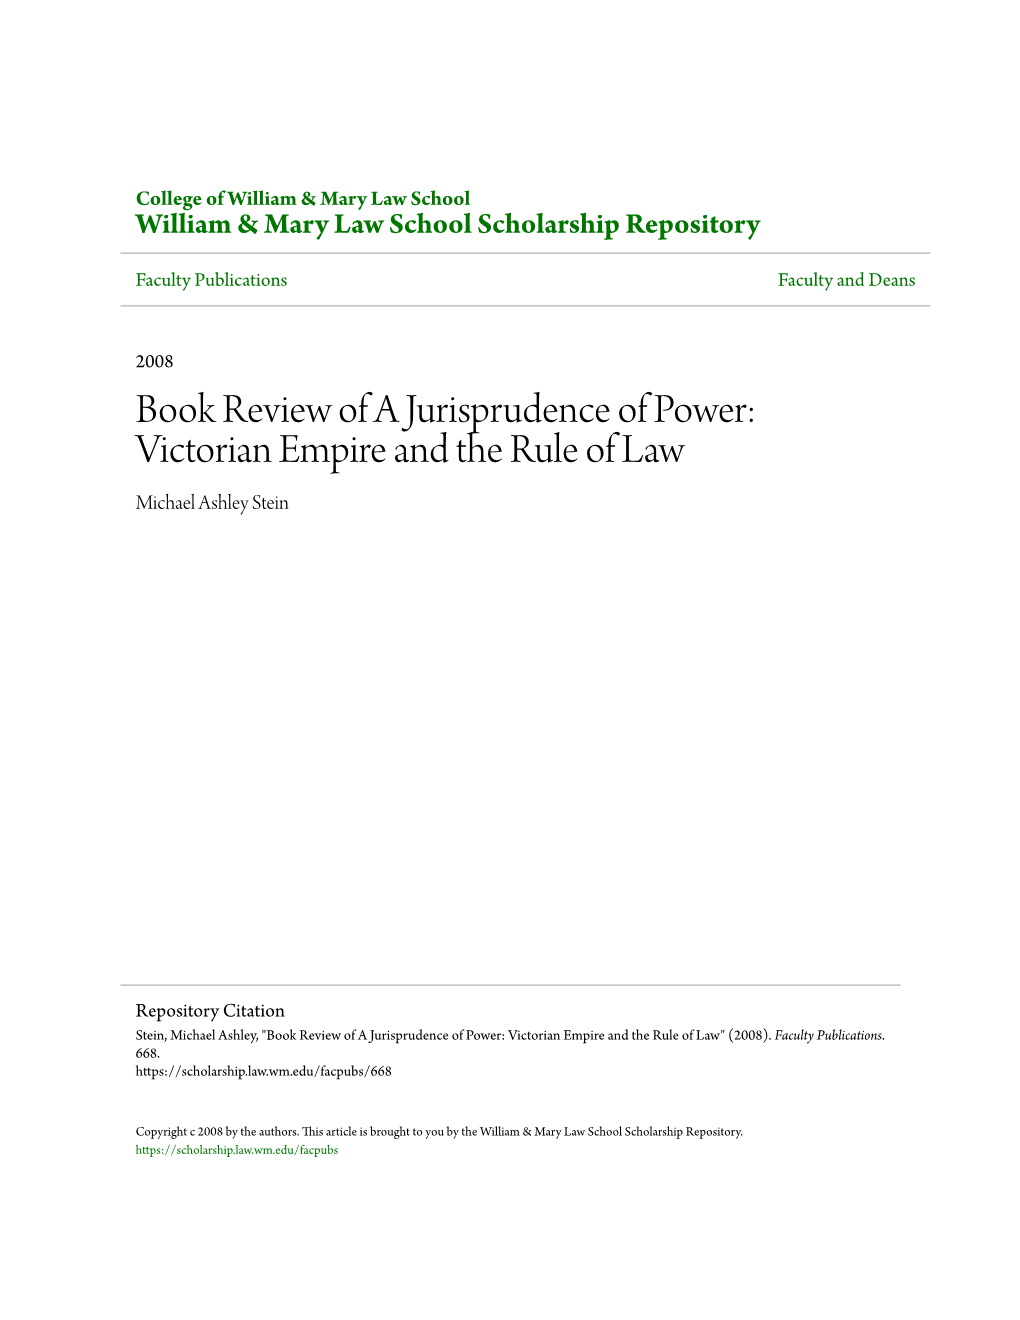 Book Review of a Jurisprudence of Power: Victorian Empire and the Rule of Law Michael Ashley Stein